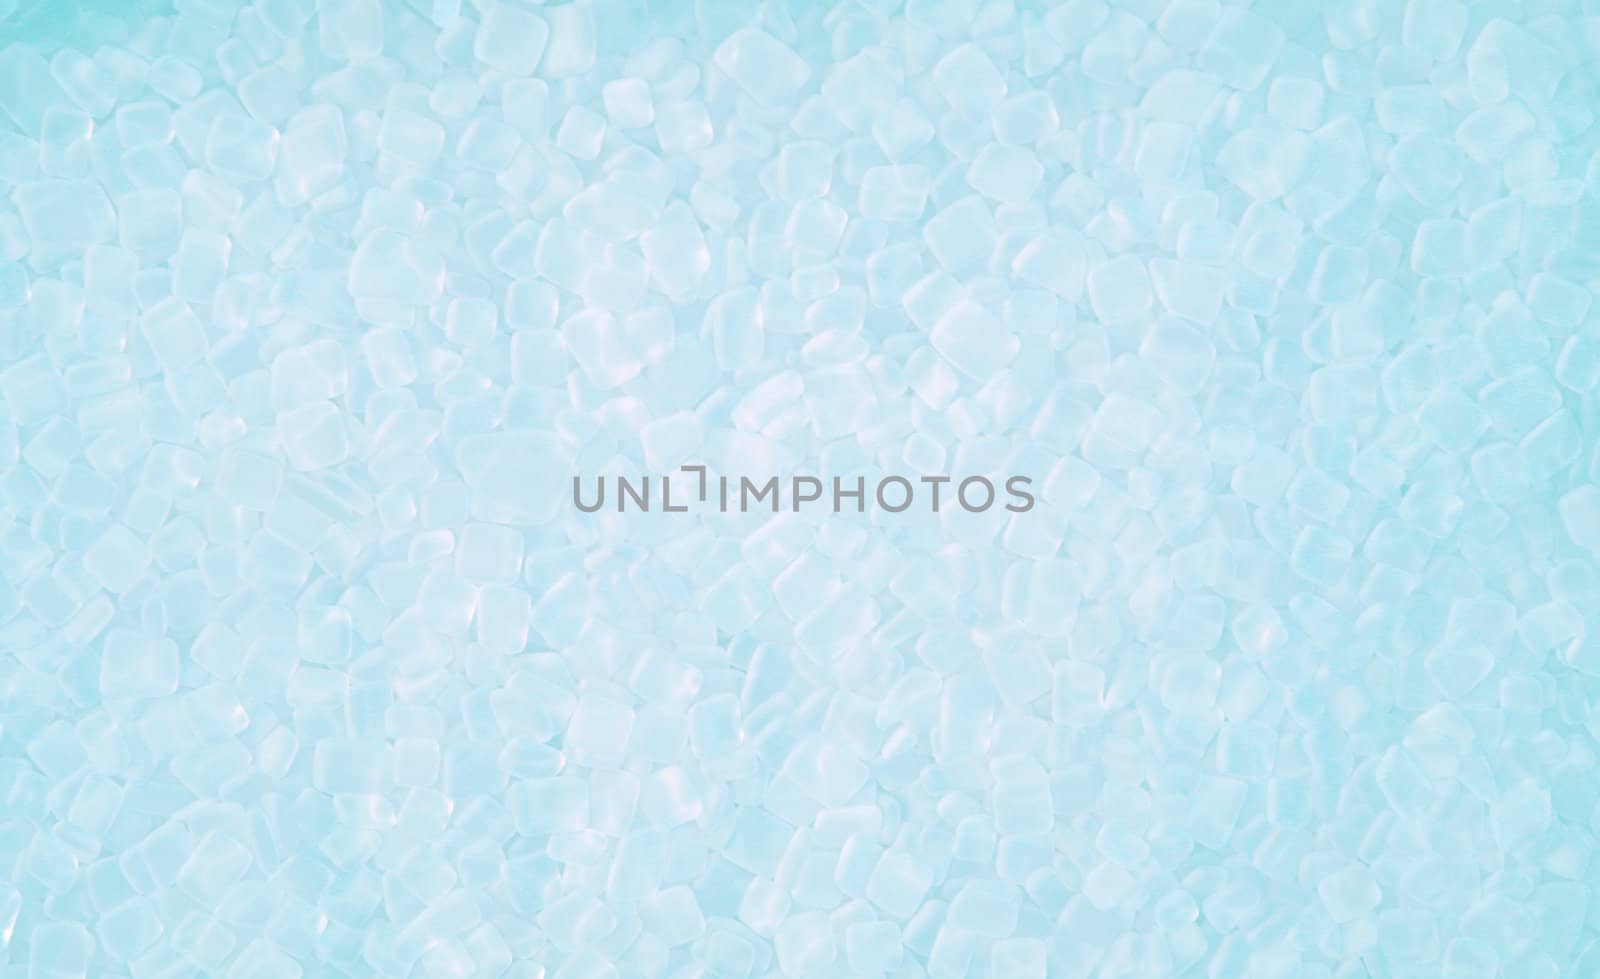 Colorful rock background, ice like shapes for background design